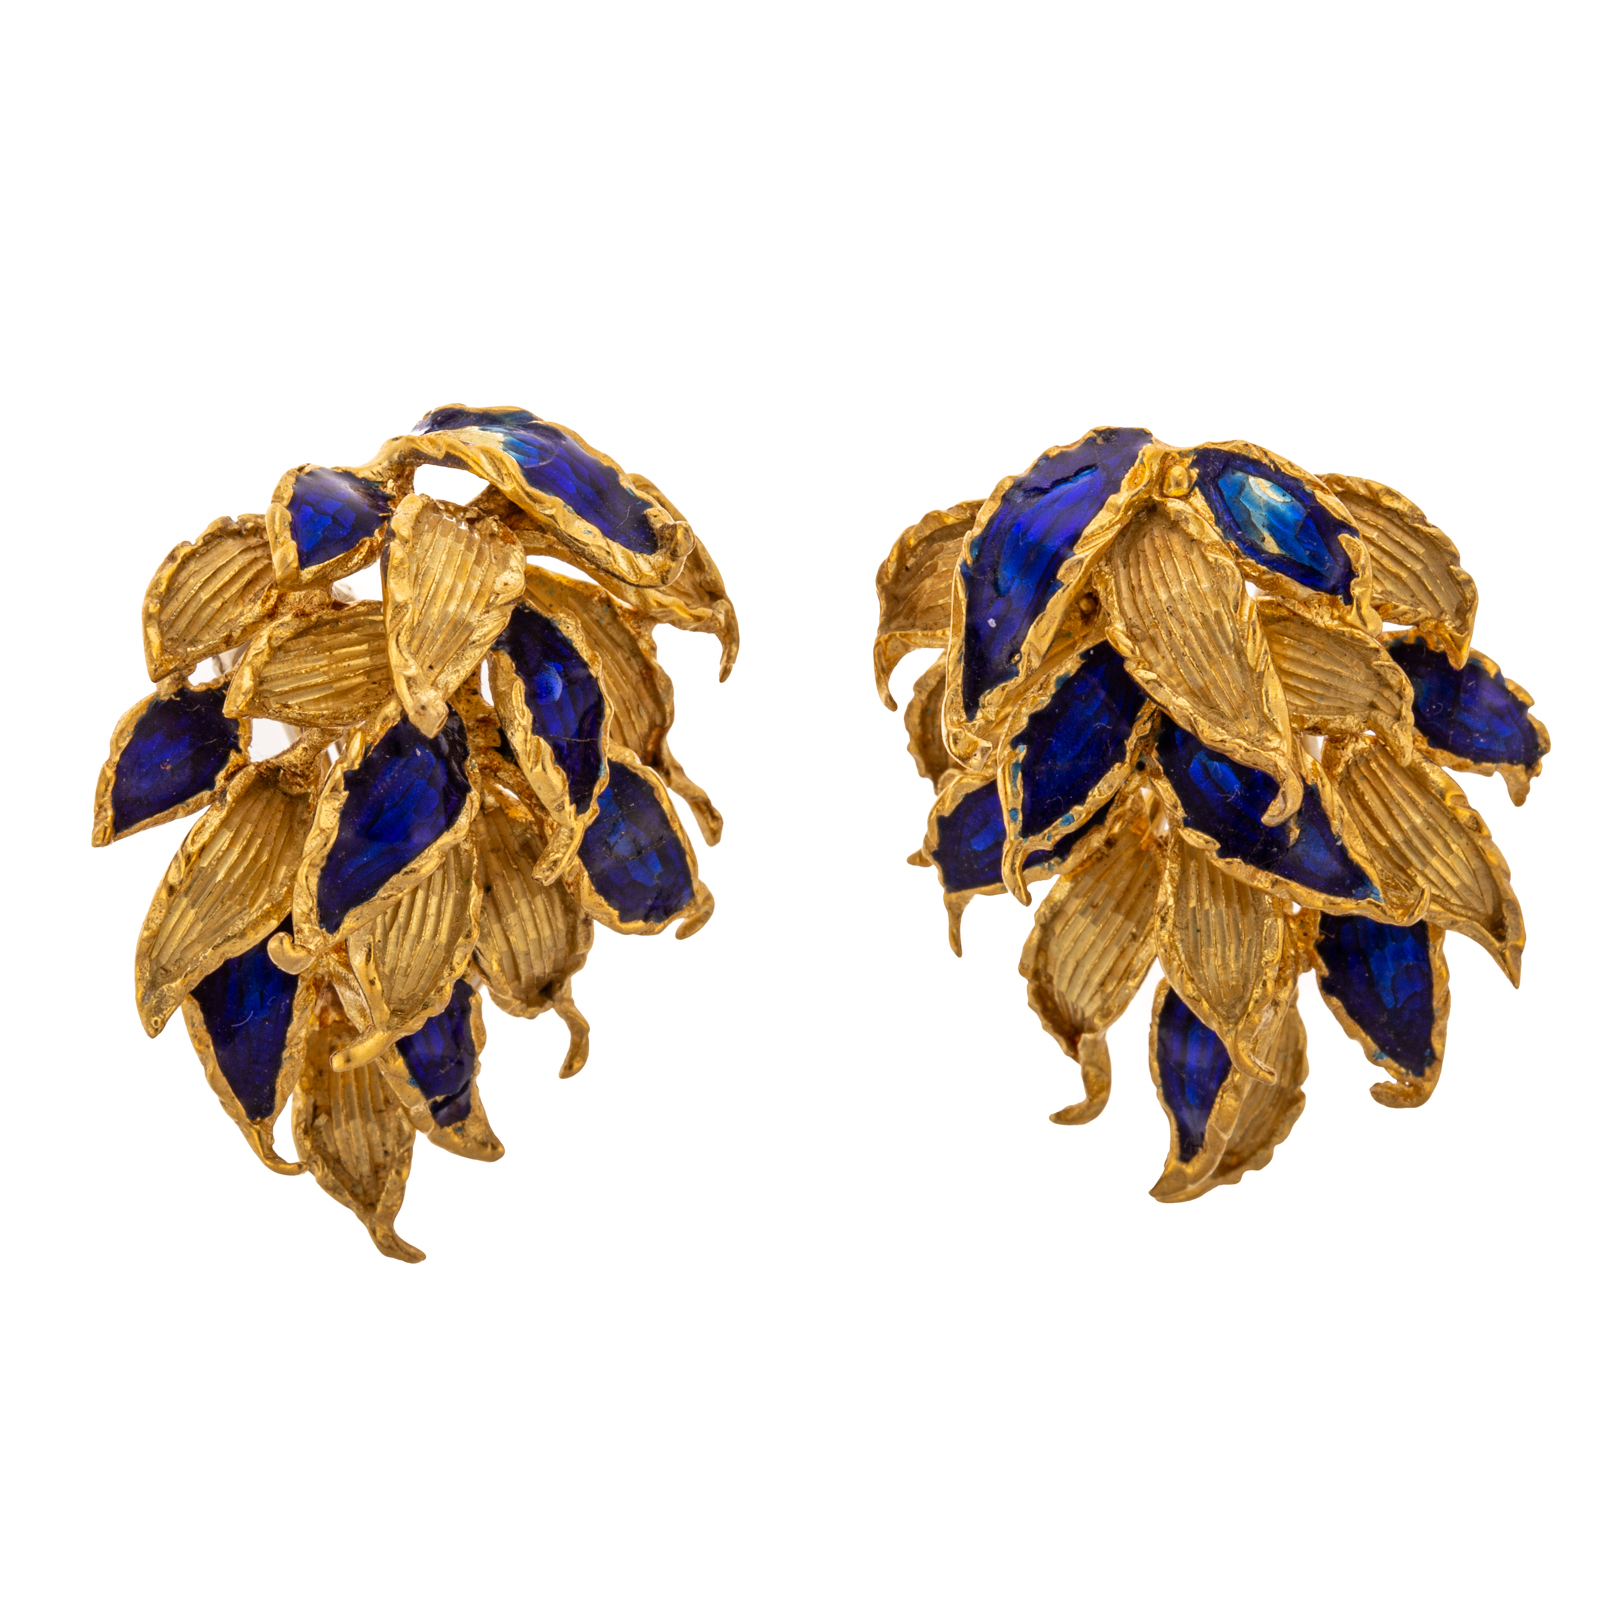 A PAIR OF TEXTURED 18K GUILLOCHE 338561